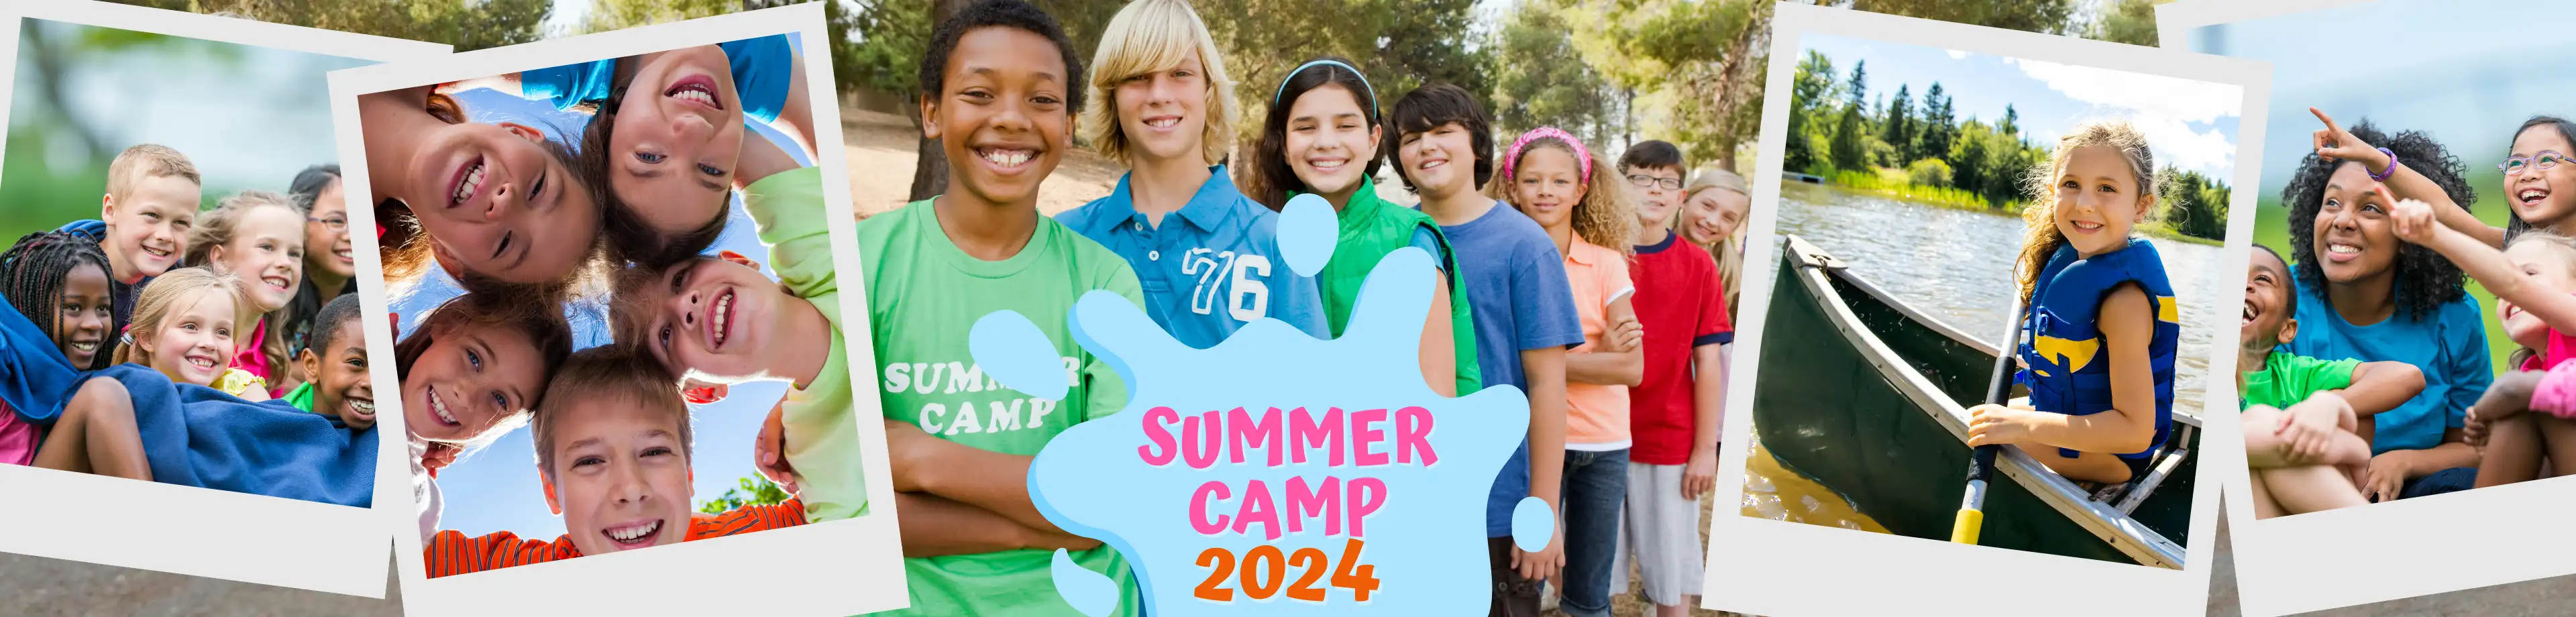 Summer Camp 2024 - Slide into summer fun and get ready for this year's camp season with our customized camp products!